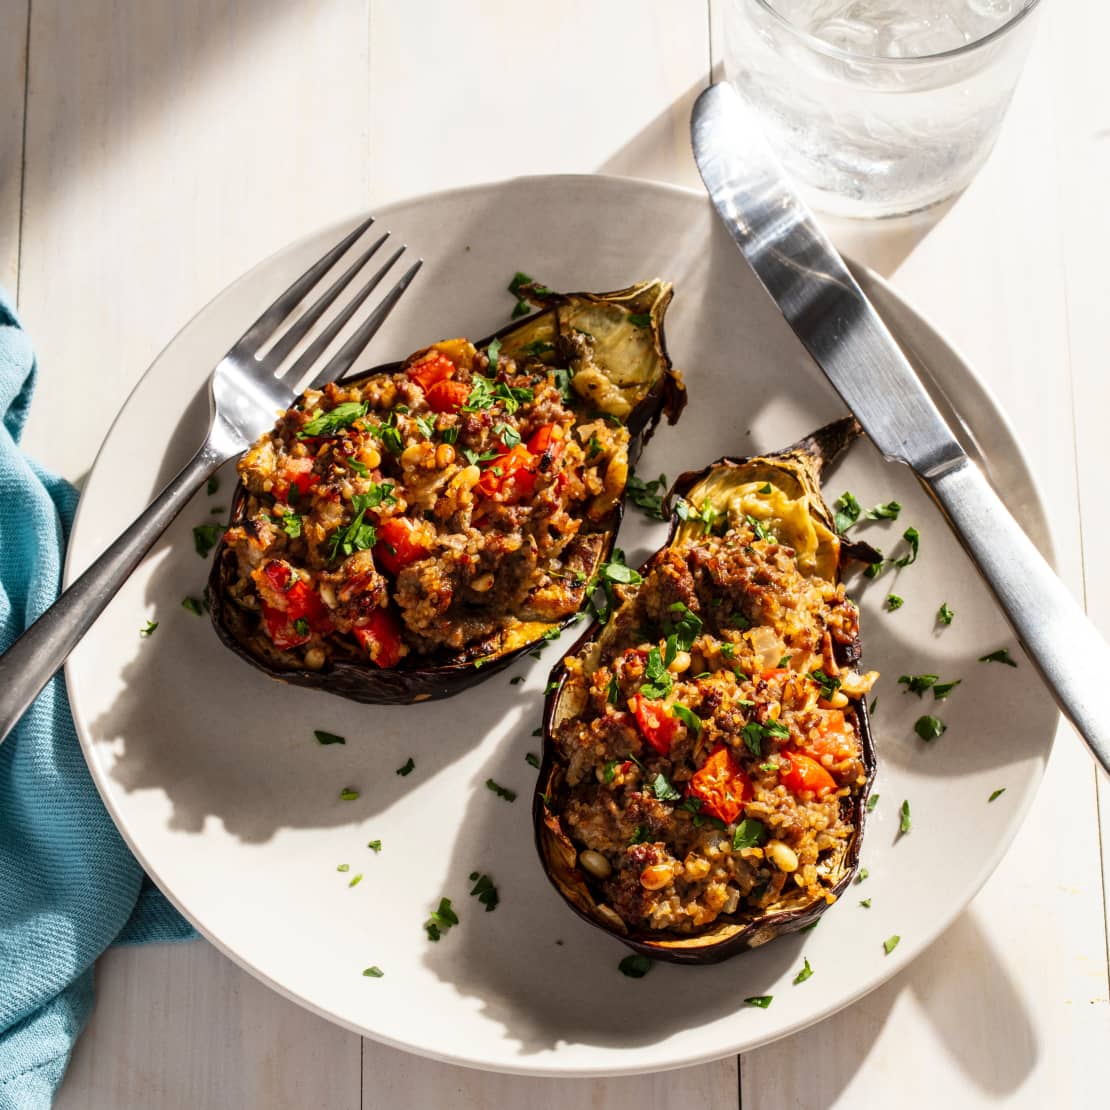 Stuffed Eggplant with Bulgur and Plant-Based Meat